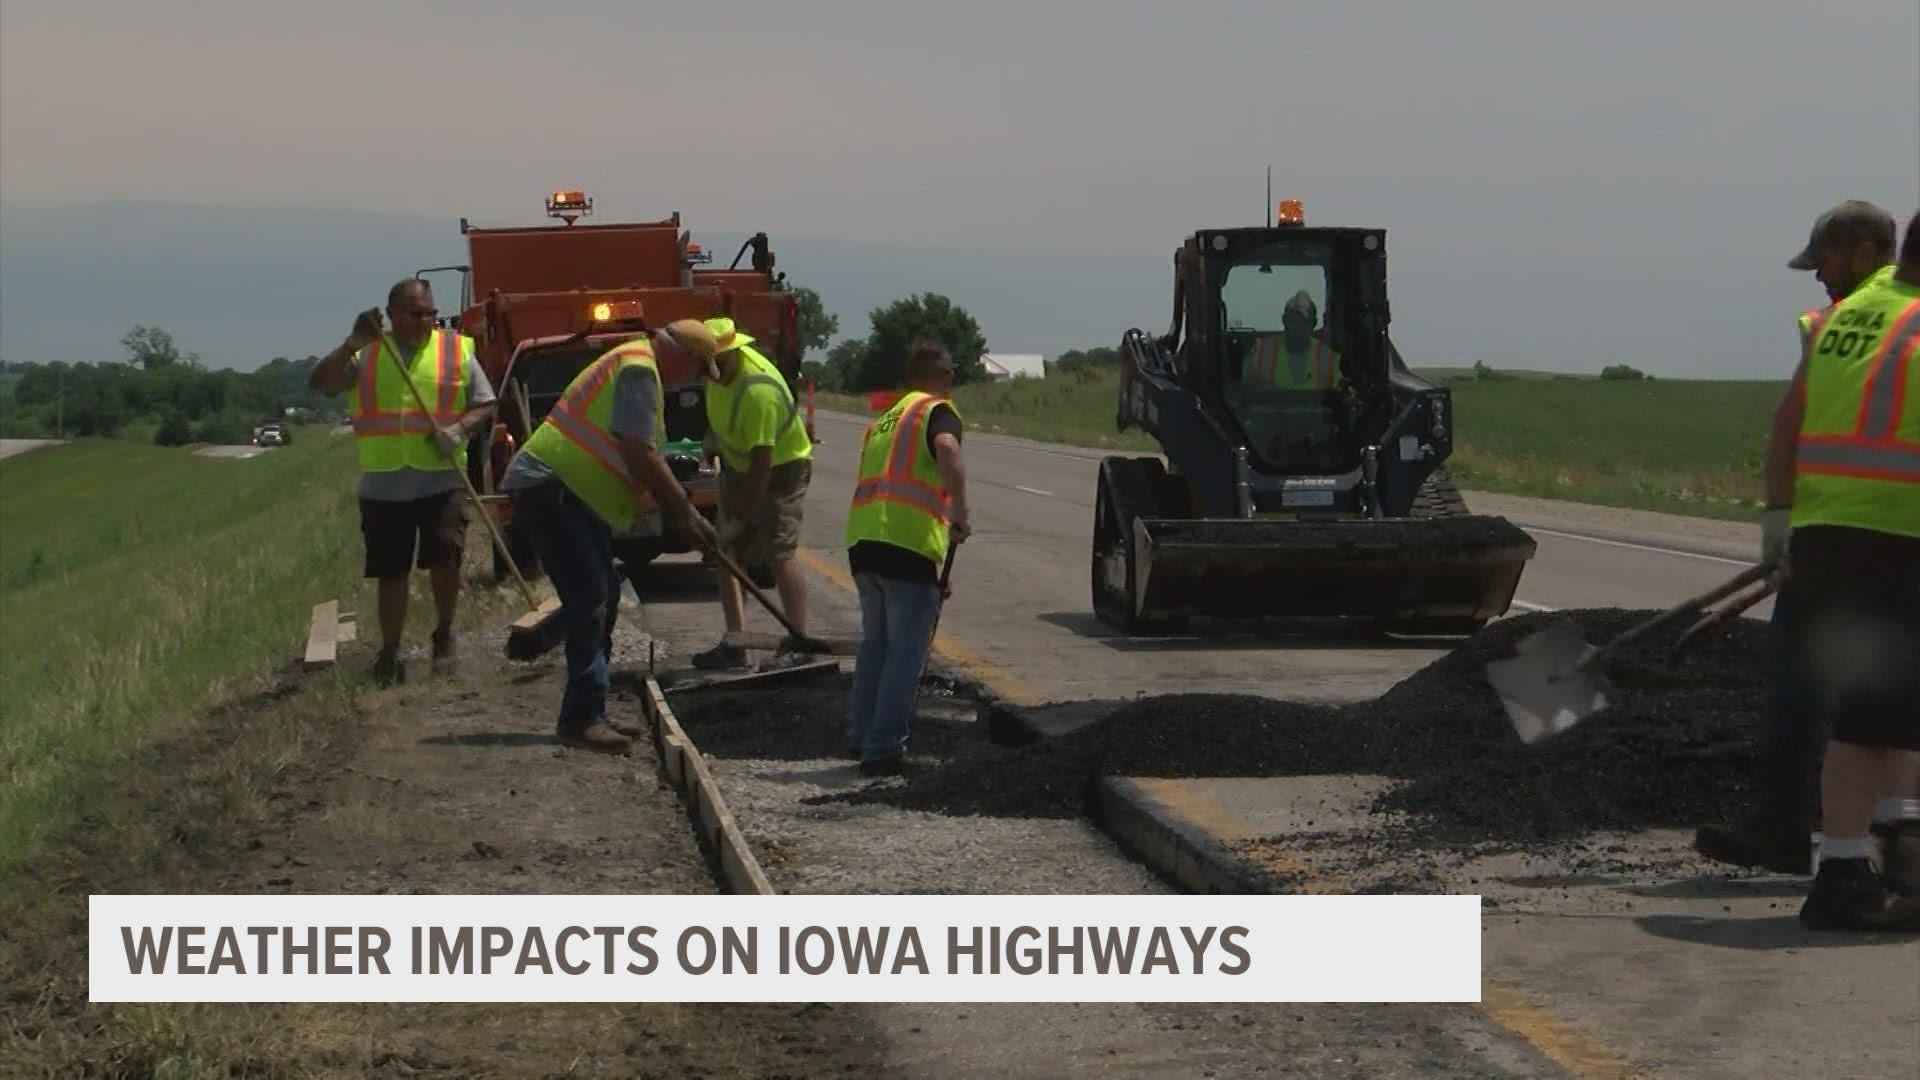 While winter can lead to potholes, summer heat can lead to sudden "blow-ups" along the highway.